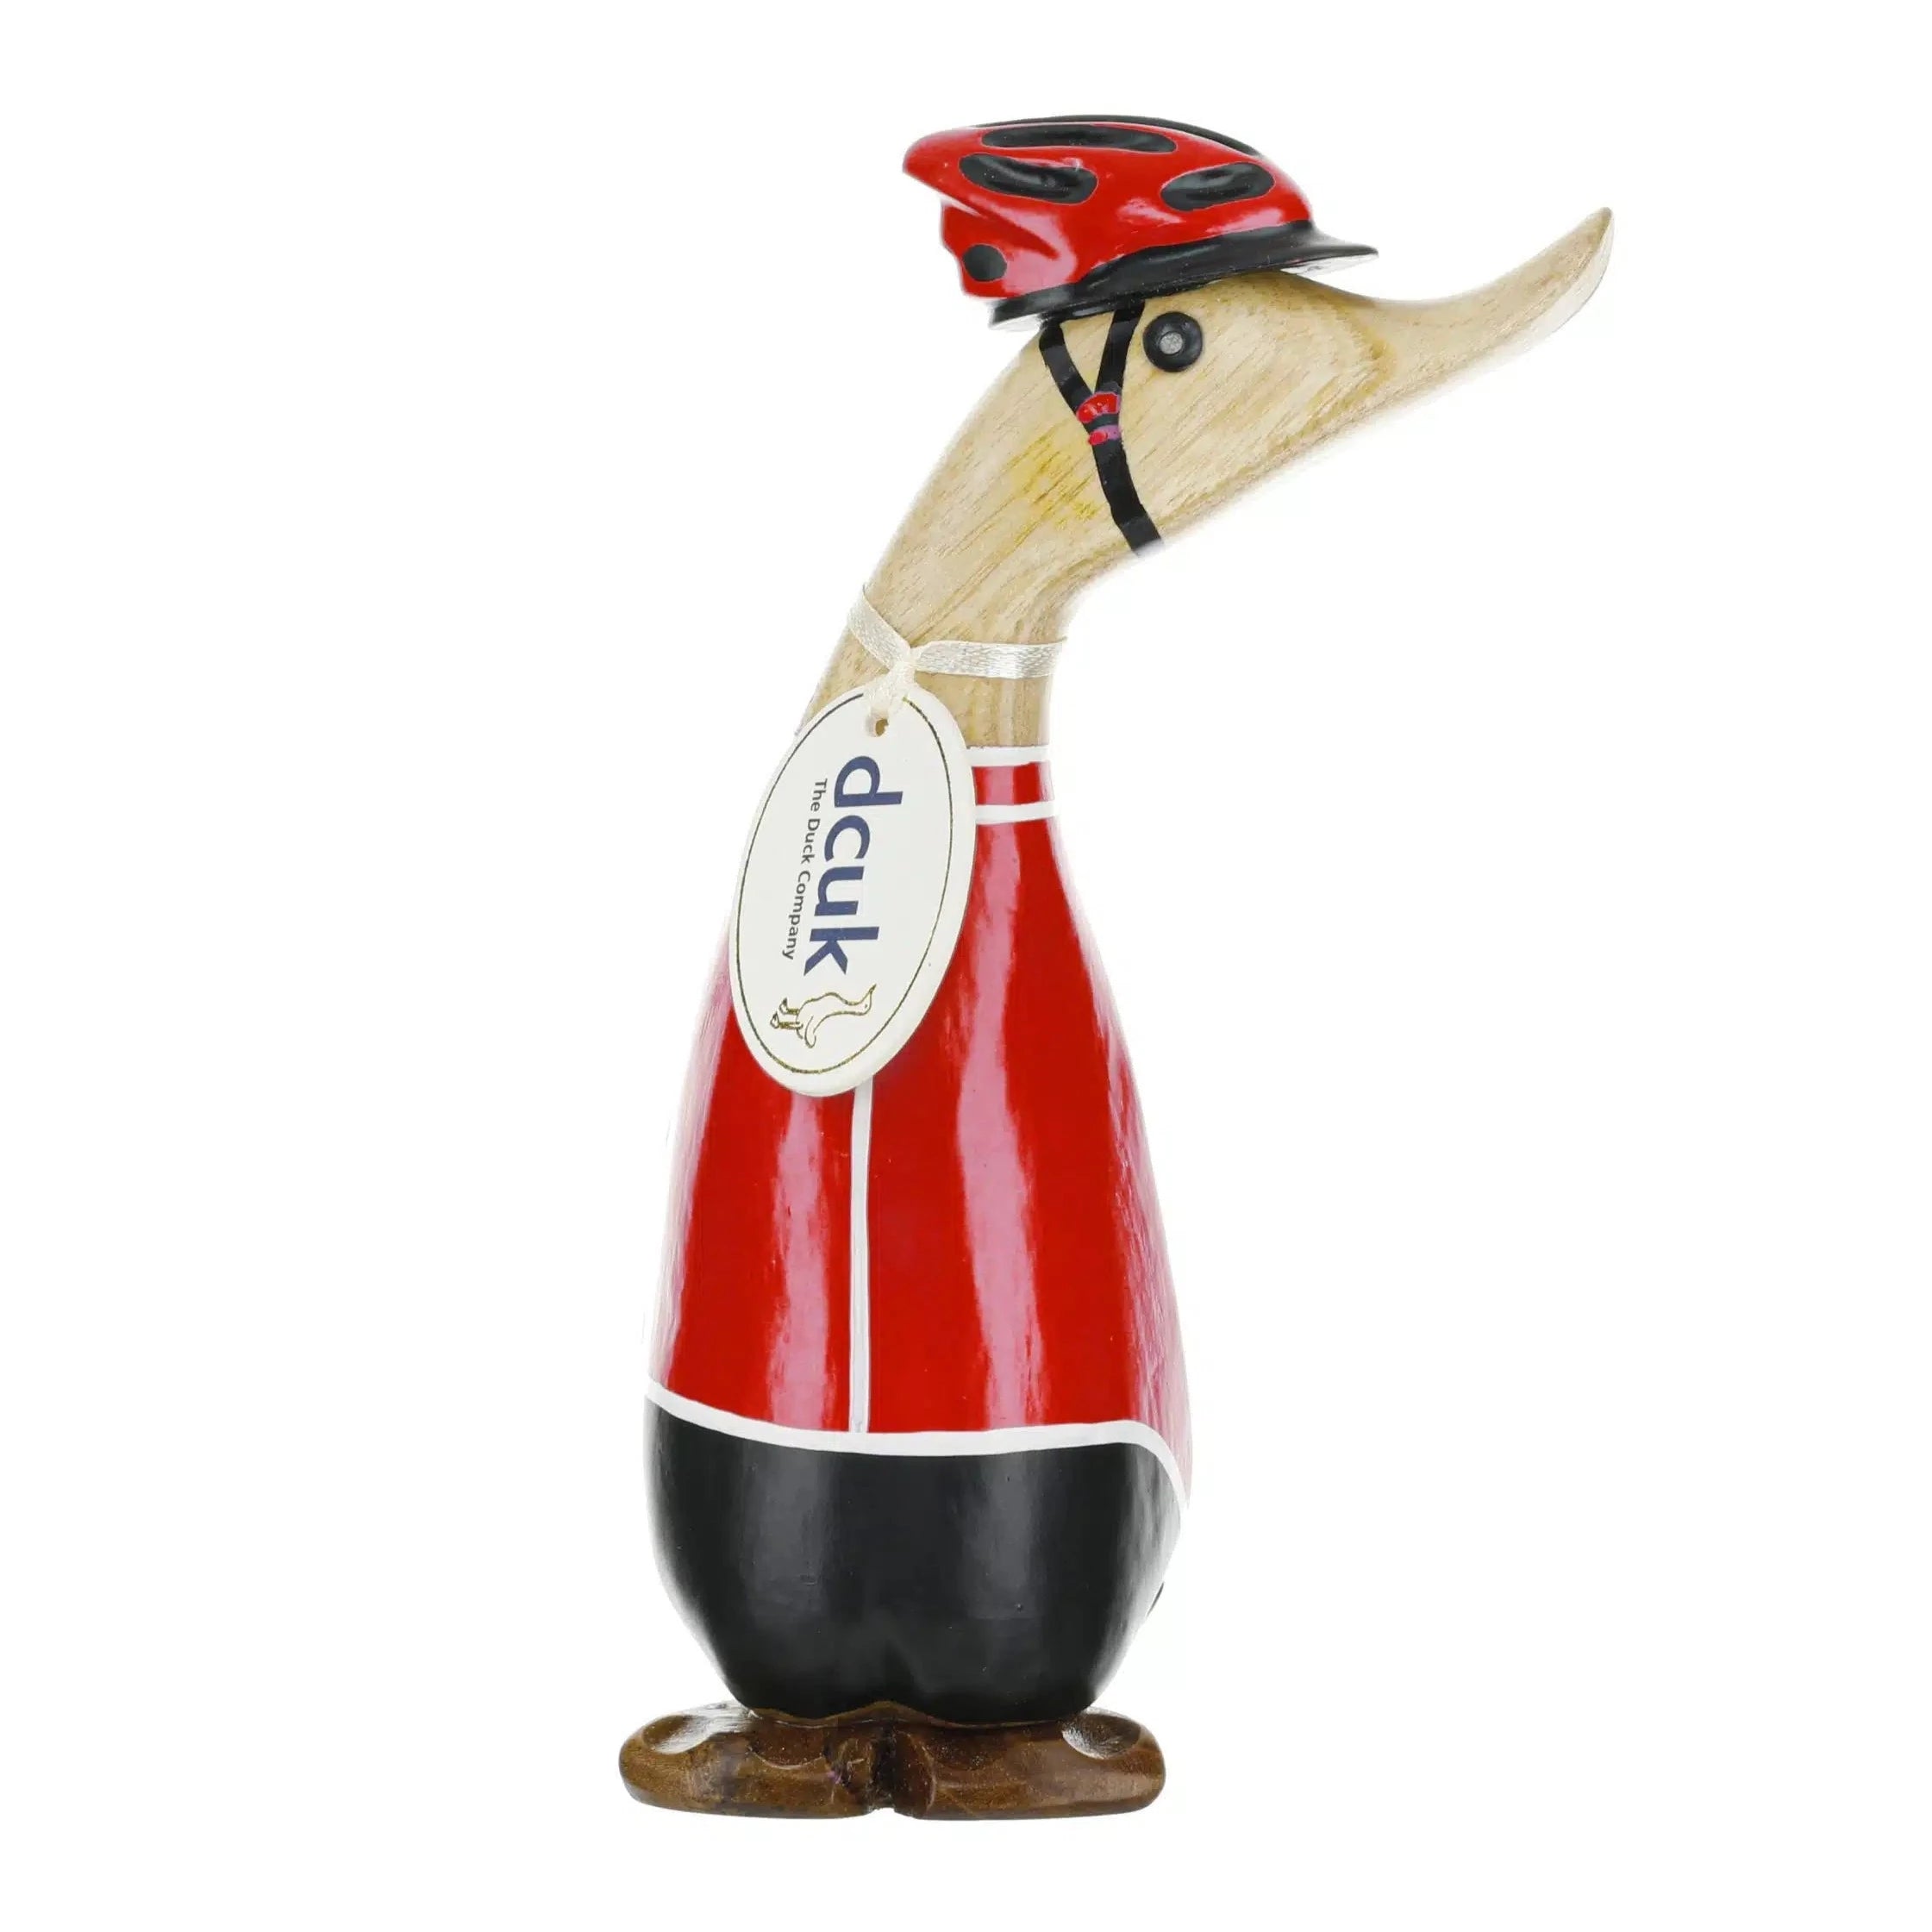 Cyclist Wooden Duckling - Red - Duck Barn Interiors